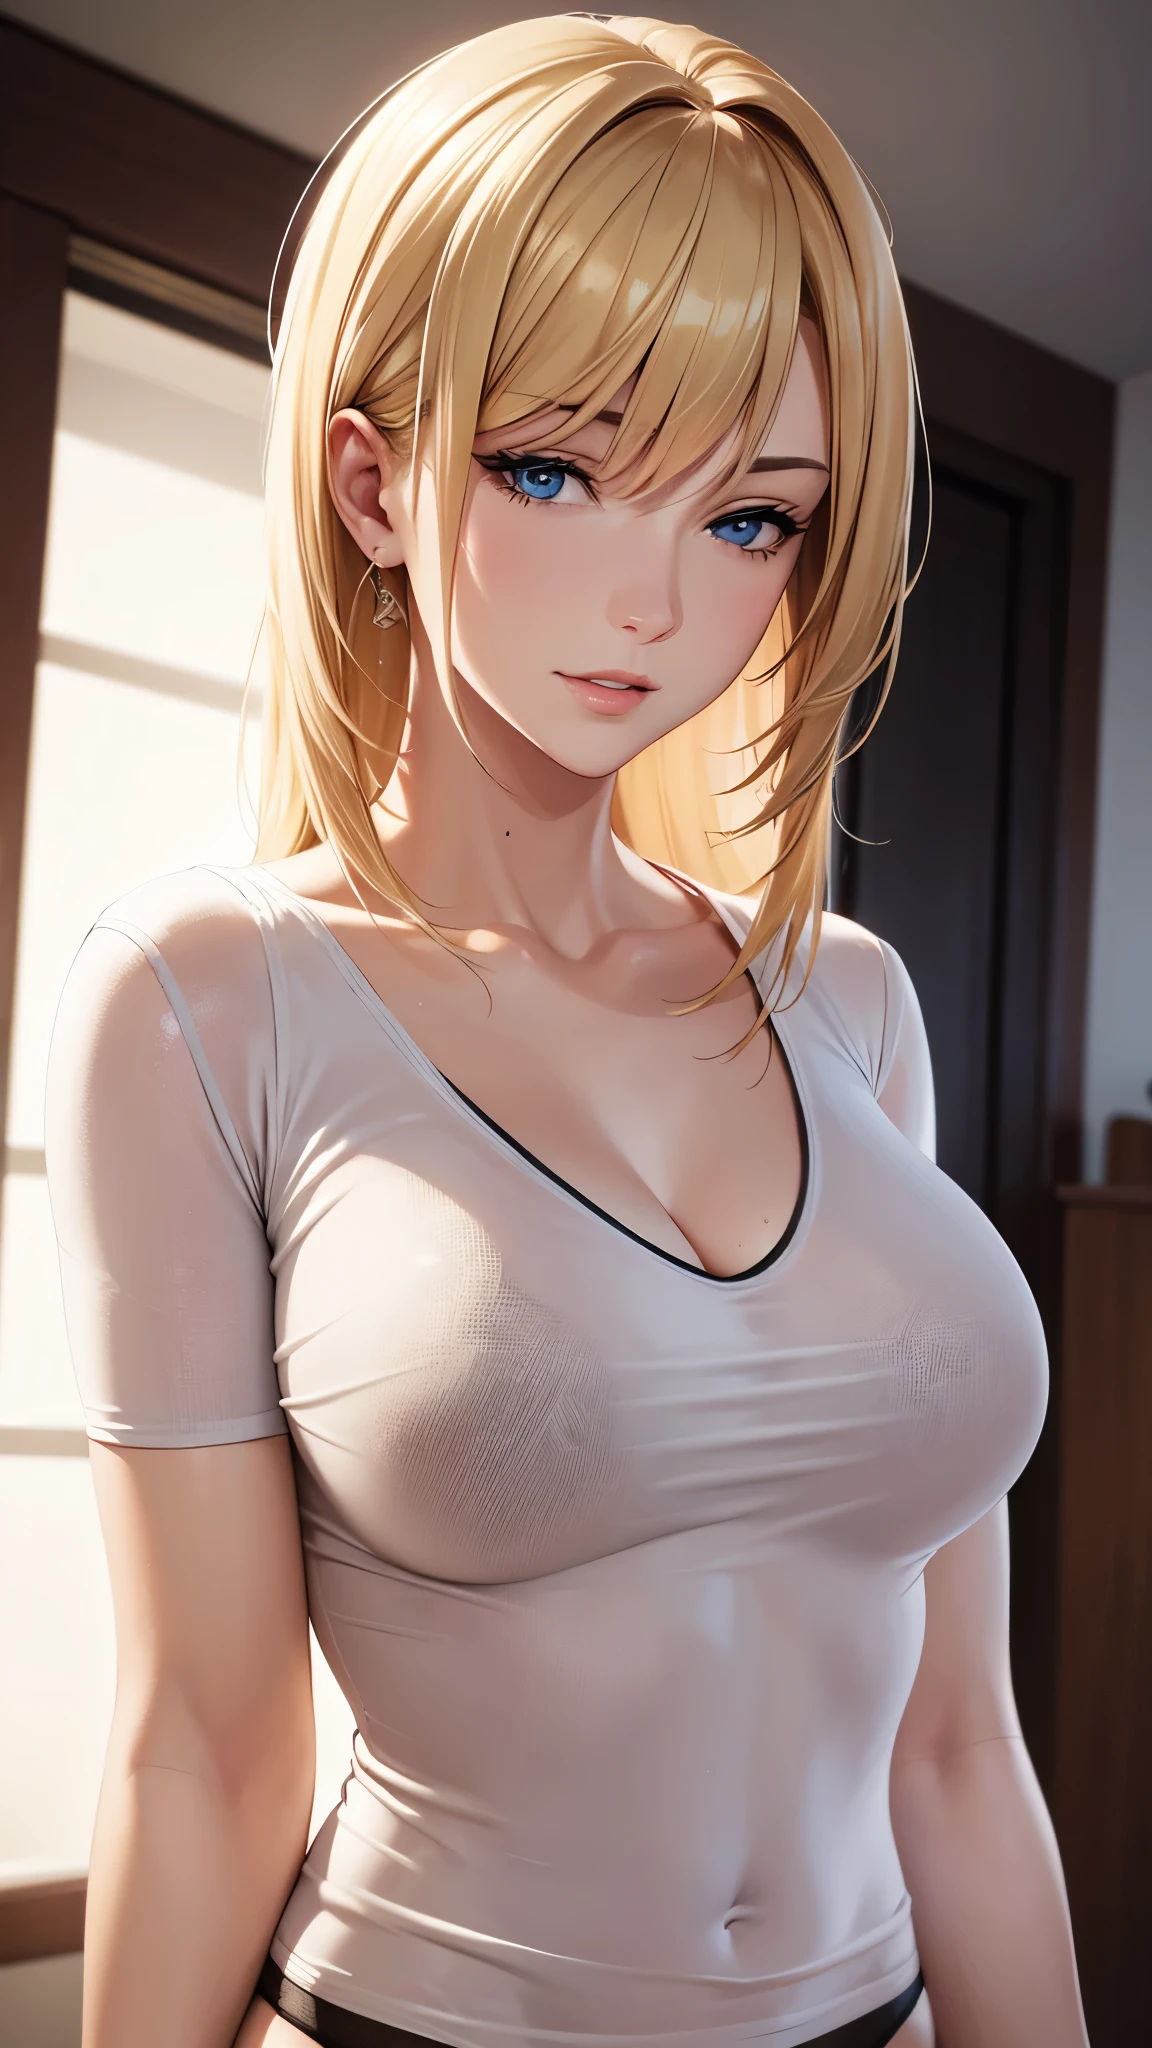 1 Female,High definition,high resolution,Ultra-realistic,8K, blonde,European,sexy,Upper body close-up,Photographed from the front,Dynamic Angles,private teacher,Y-shirt,A little sheer underwear